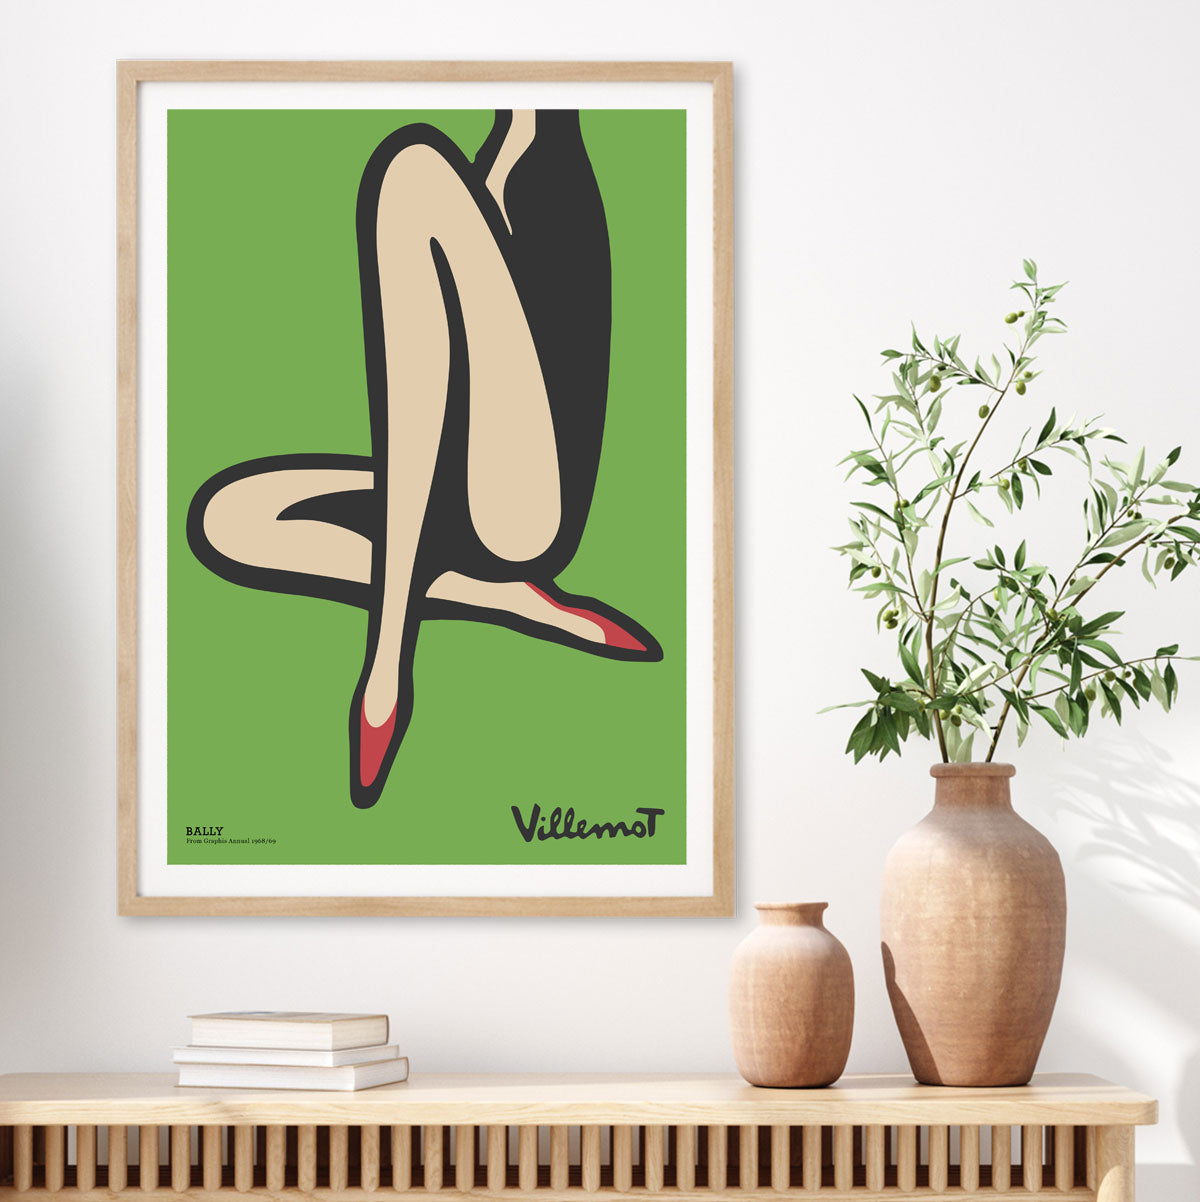 Villemot Bally retro vintage poster in green from Places We Luv